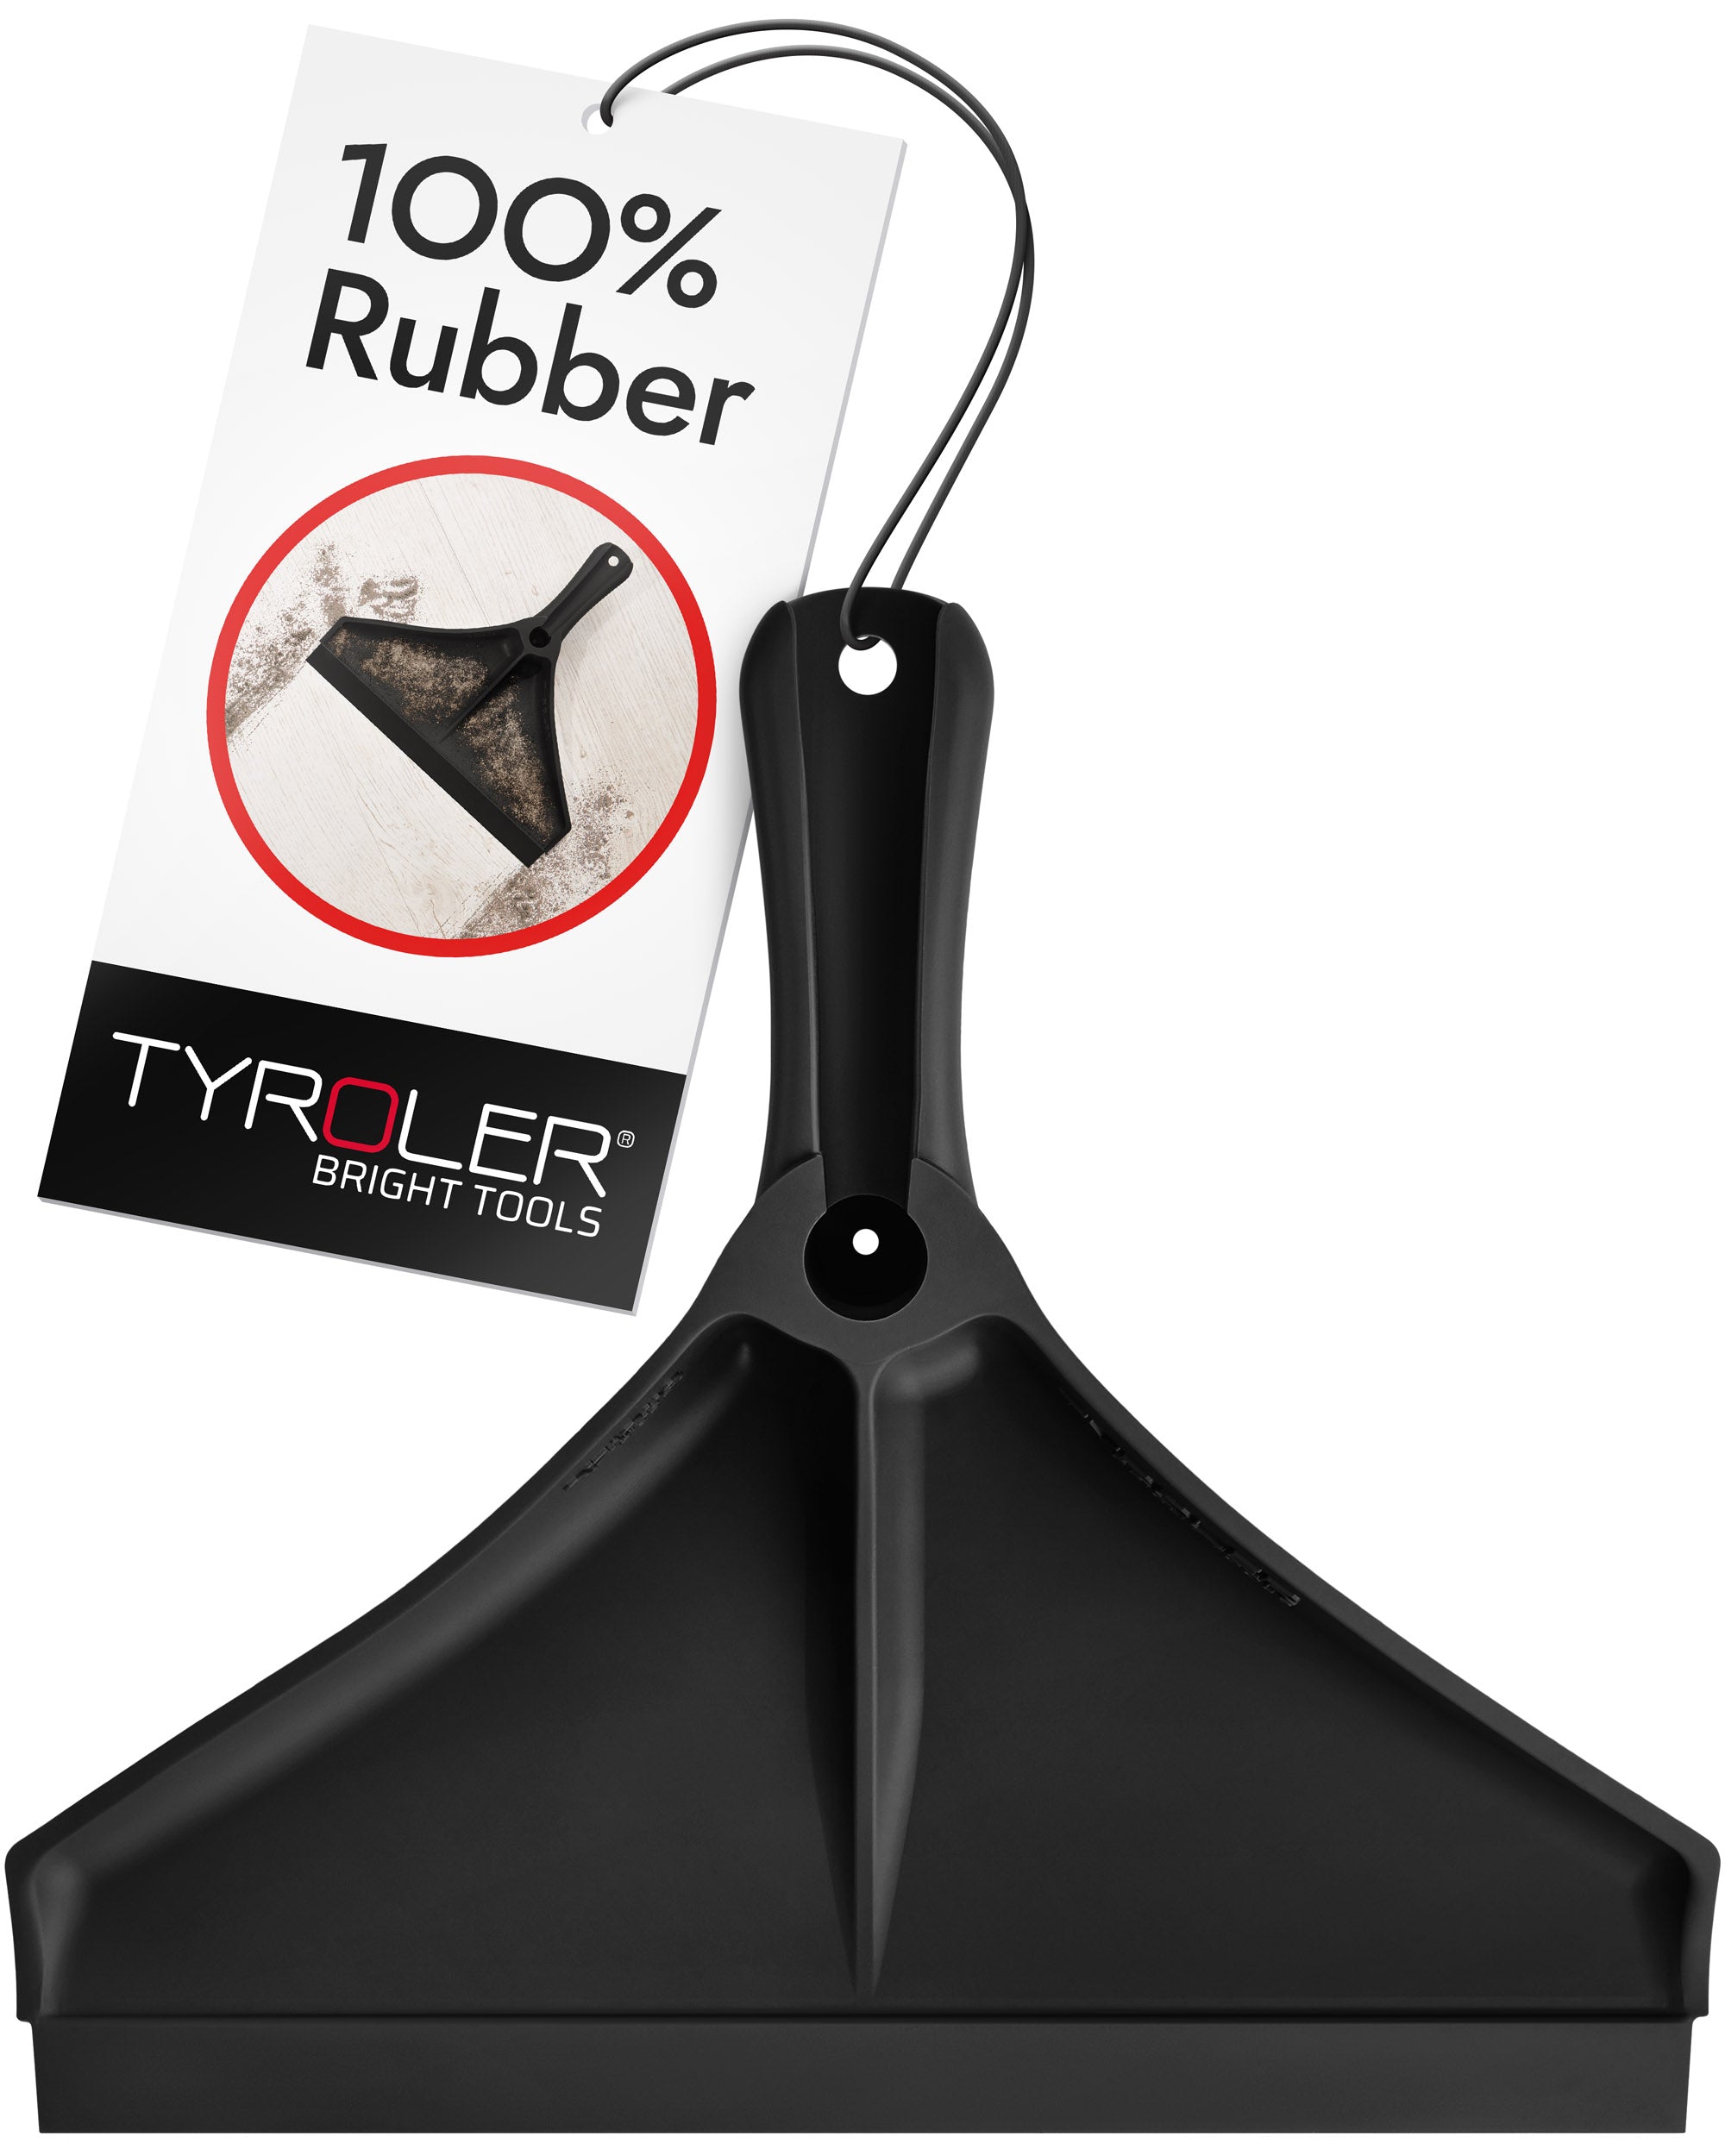 Stick to Floor Compact Rubber Dustpan